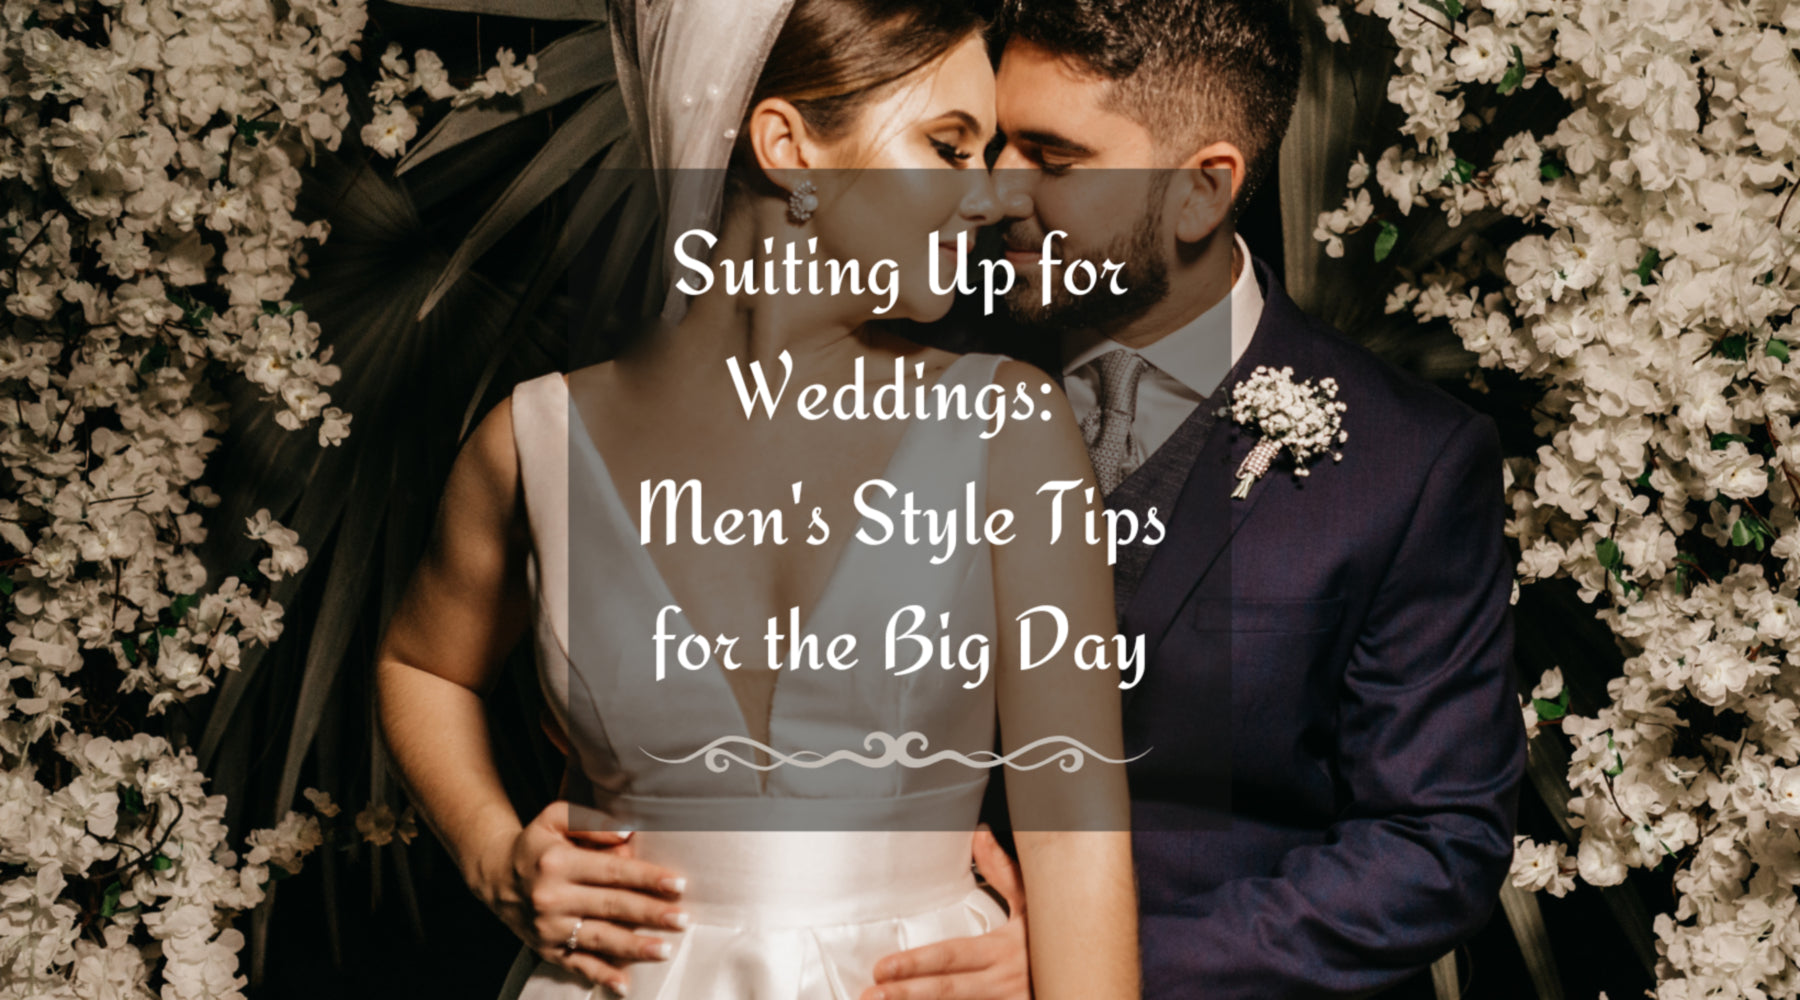 Suiting Up for Weddings: Men's Style Tips for the Big Day